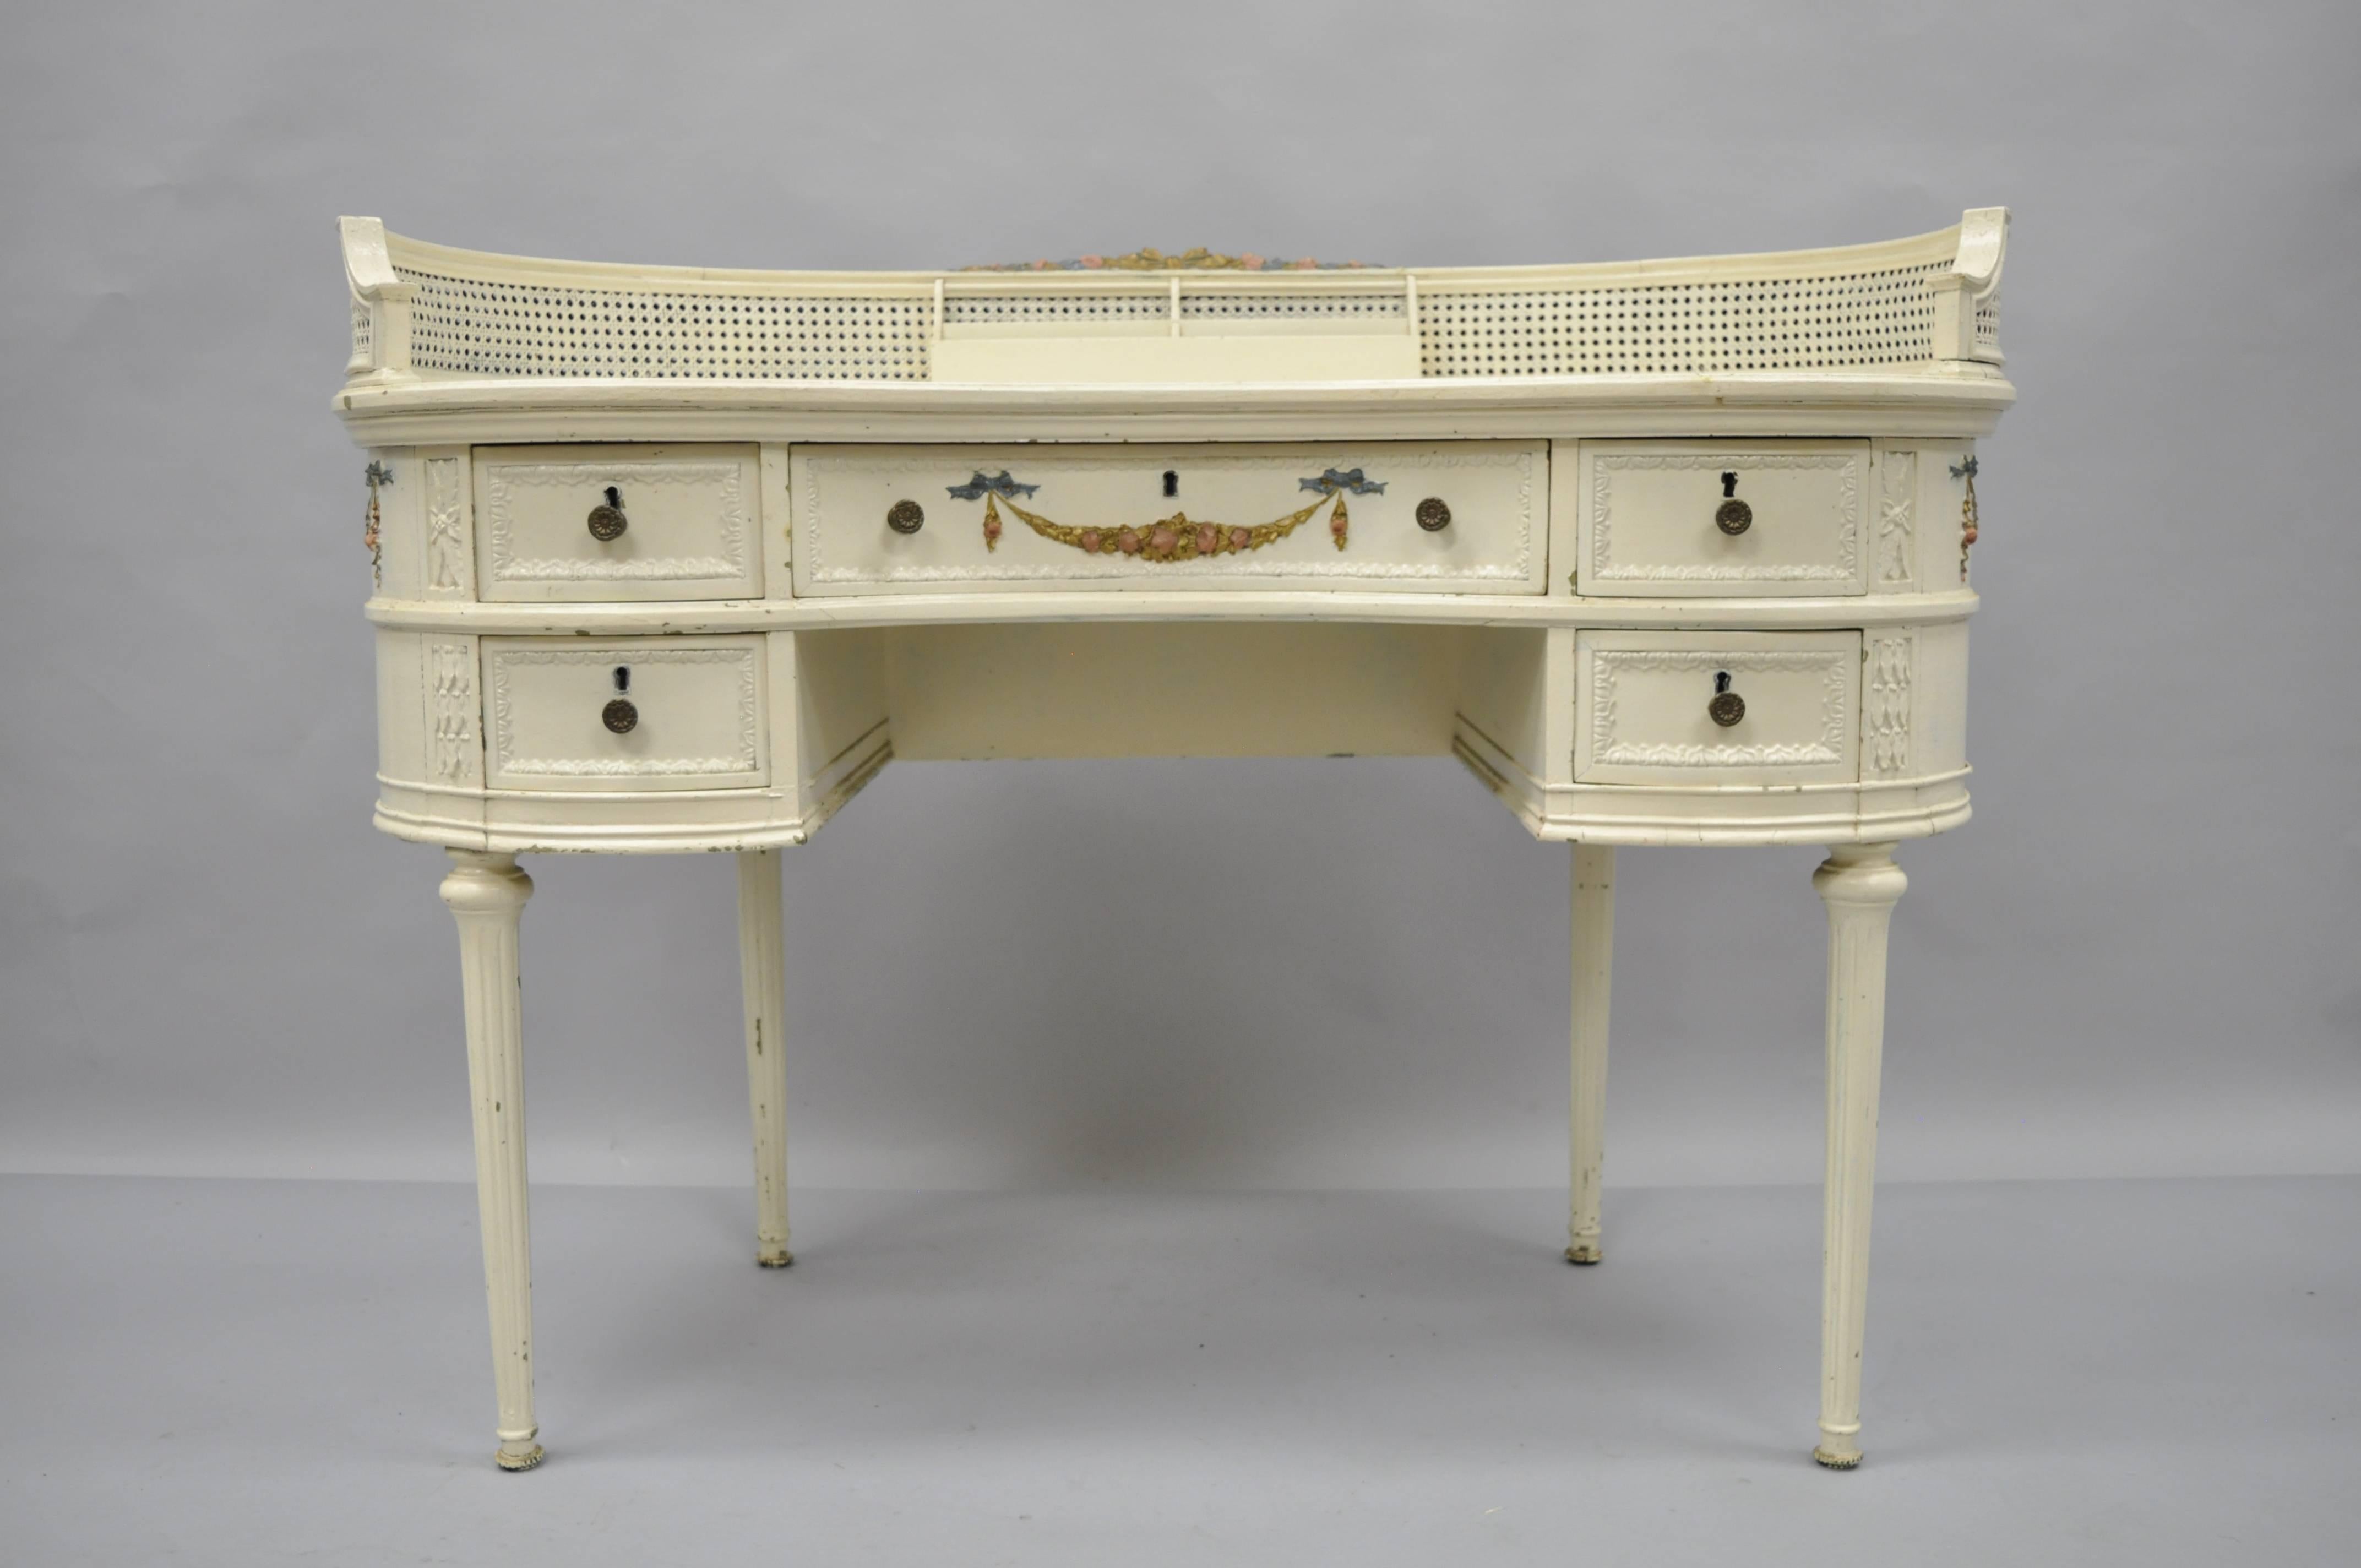 Antique French Louis XVI style kidney shaped writing desk or vanity table. Item features a unique kidney shape, finished back, floral drape applied carvings to drawer front and sides, cane gallery with storage slots, distressed white painted finish,